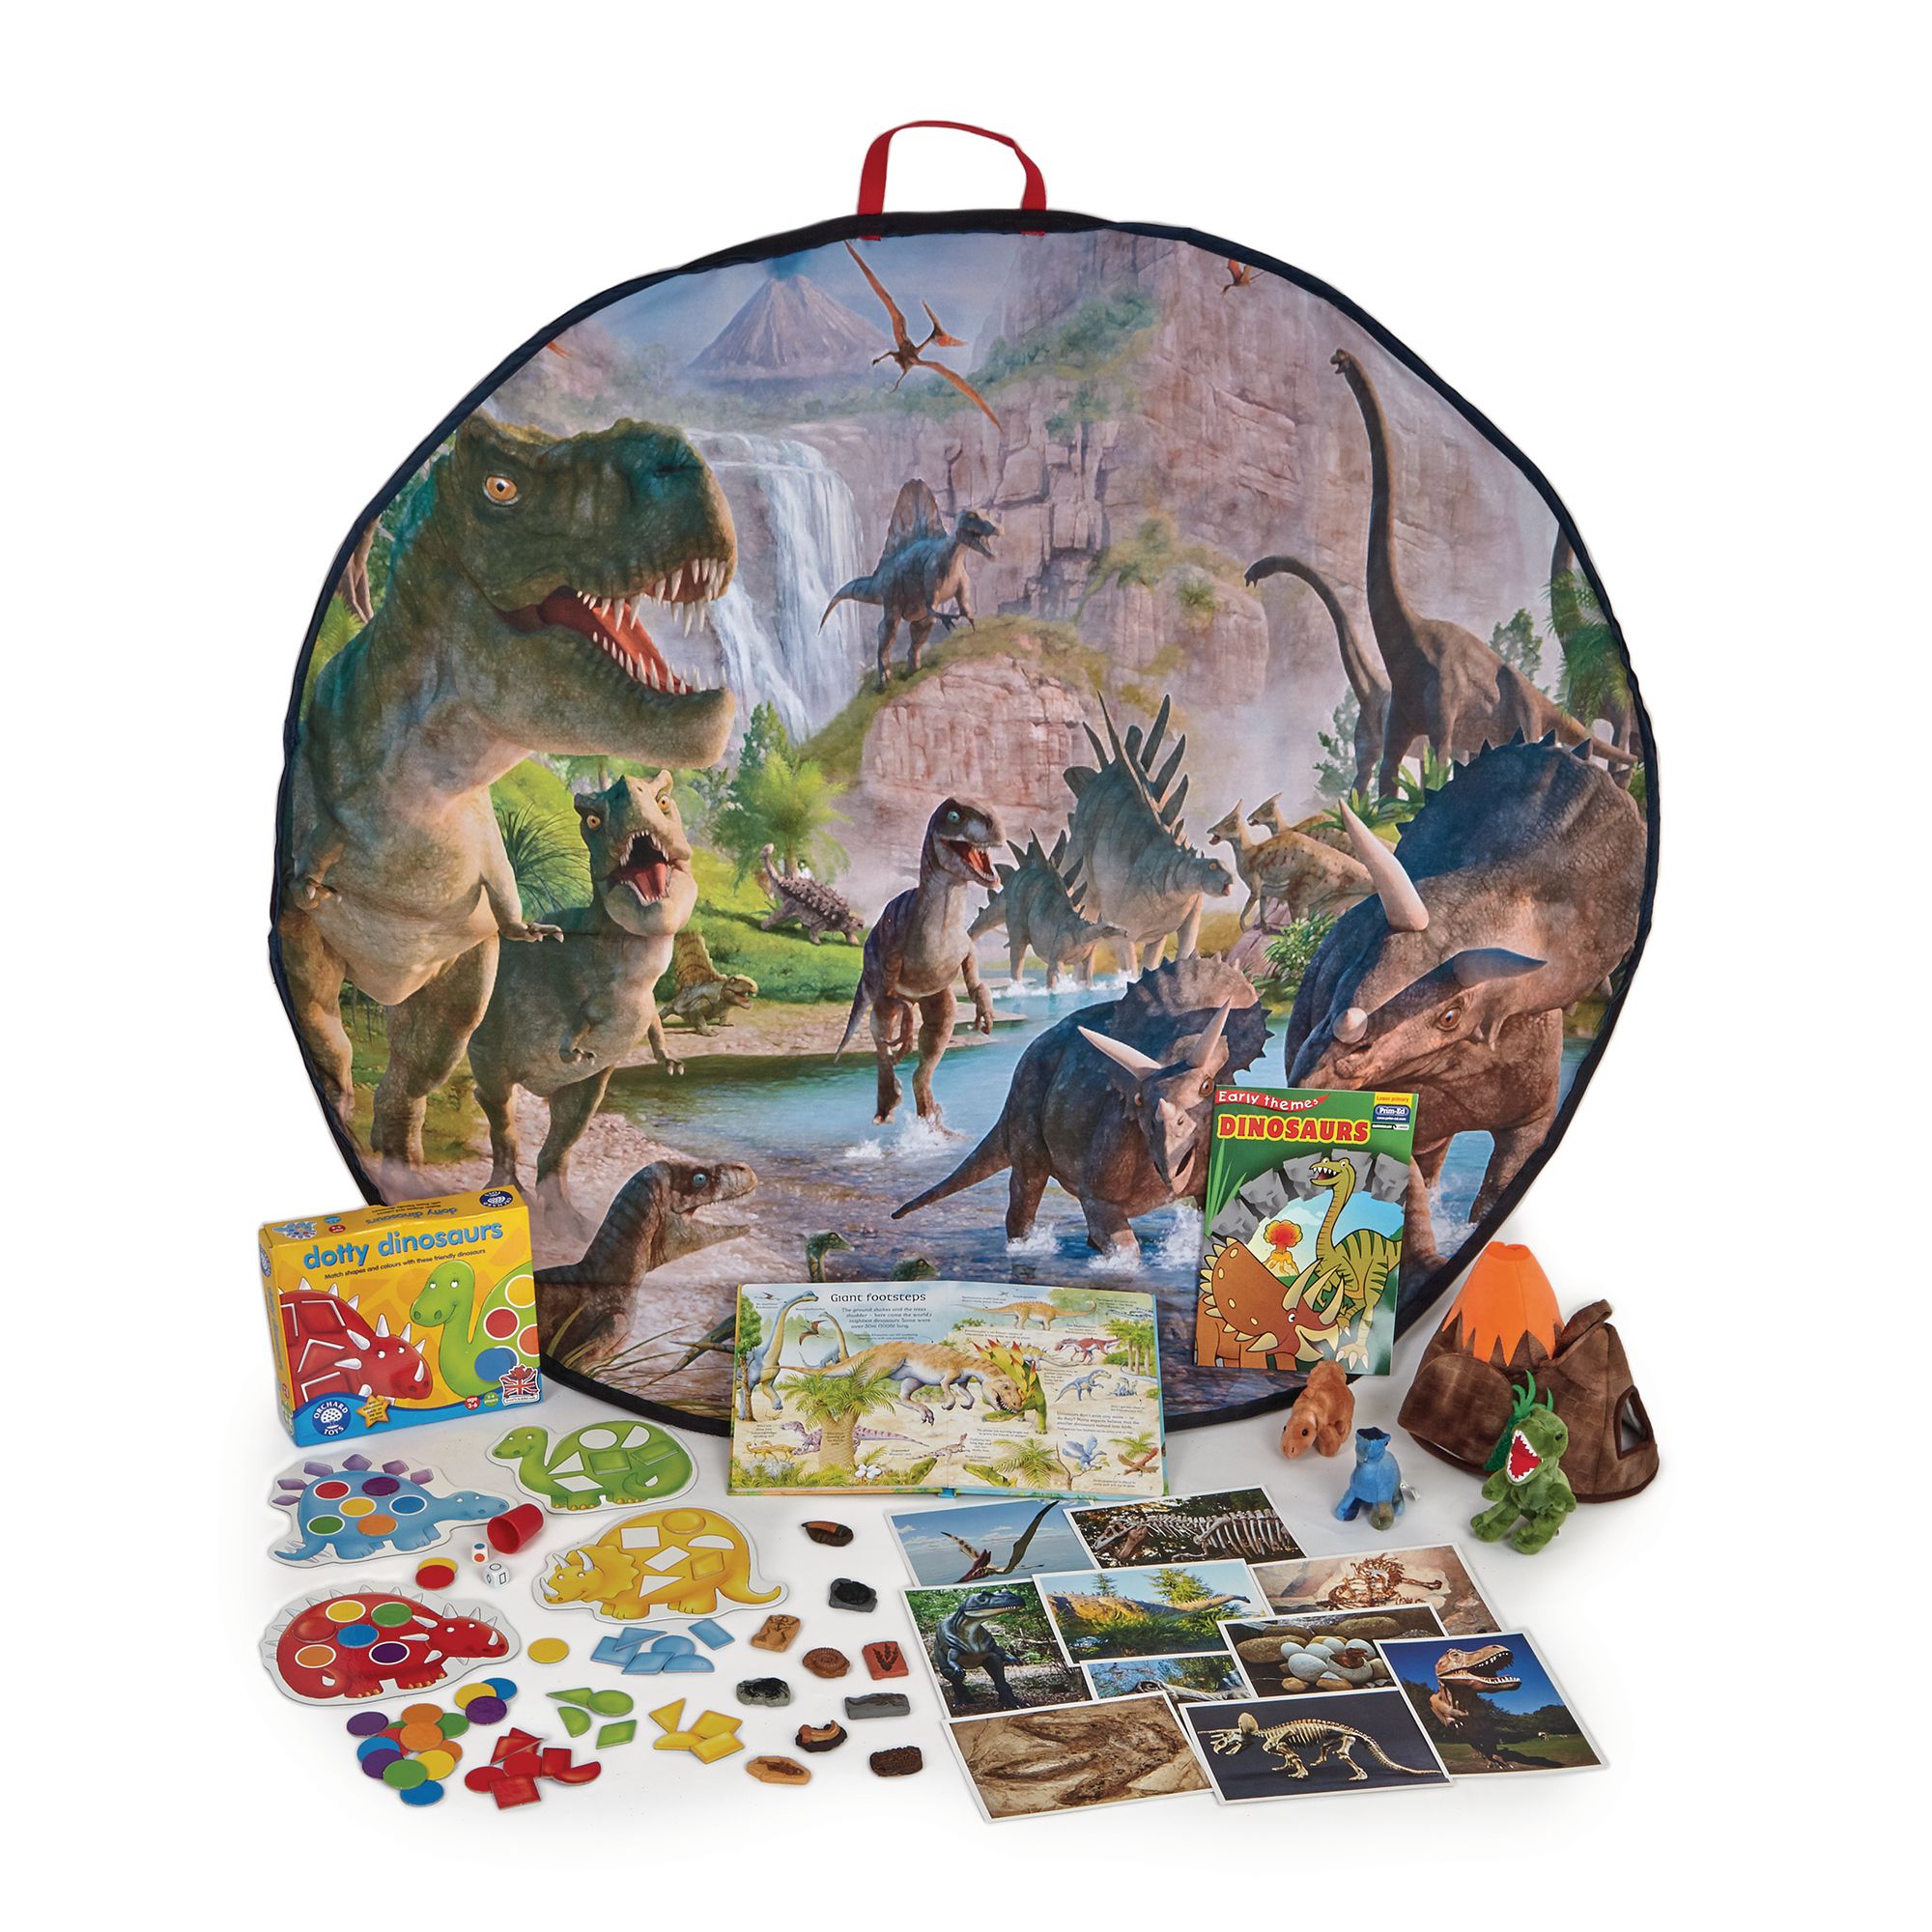 Dinosaurs Tale Tote